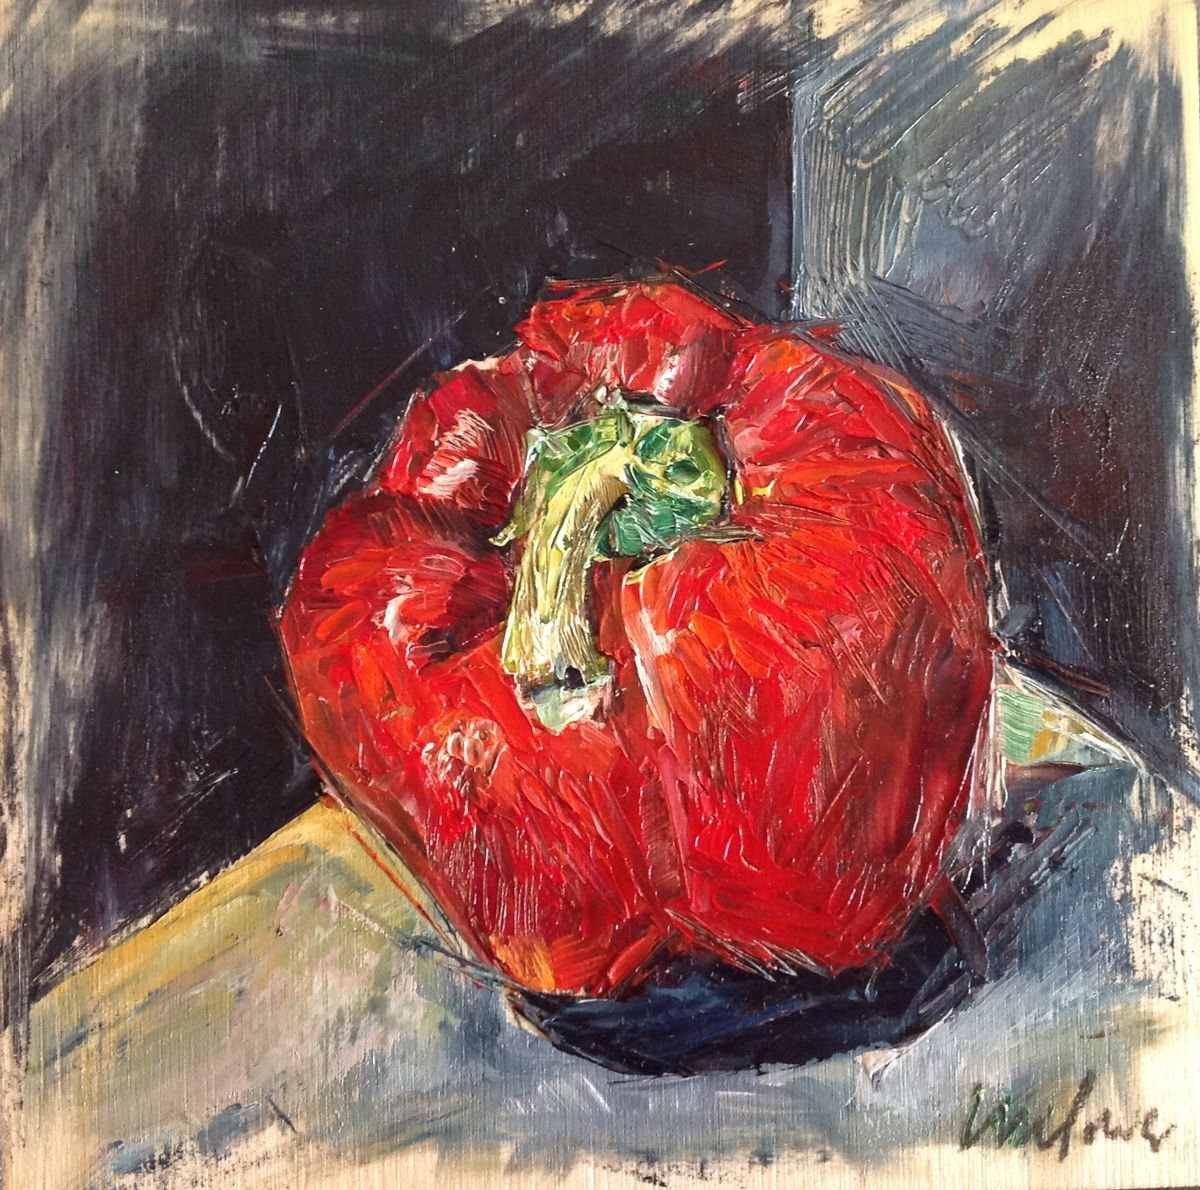 Red pepper - Framed still life oil painting on board by Luci Power